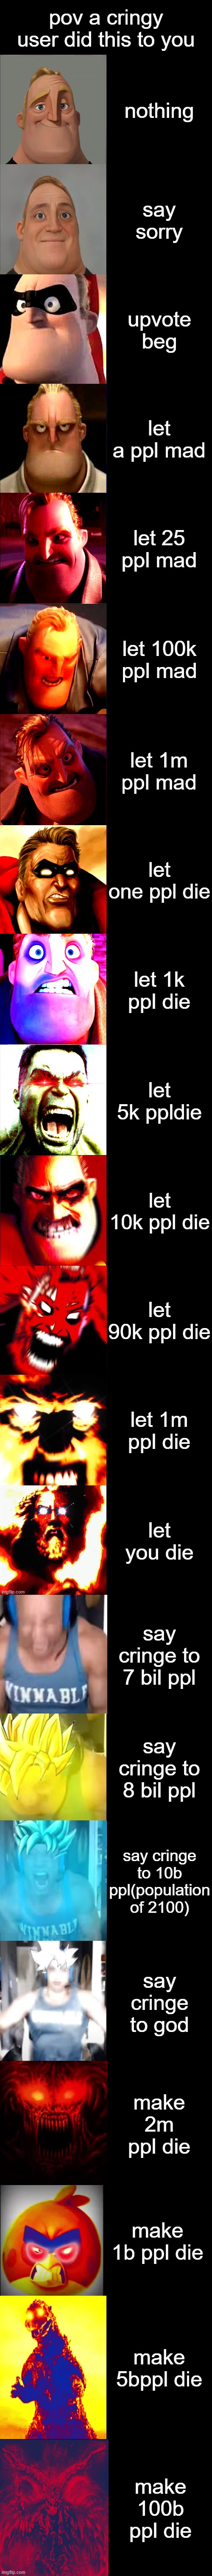 Mr Incredible Becoming Angry (21 phases) | pov a cringy user did this to you; nothing; say sorry; upvote beg; let a ppl mad; let 25 ppl mad; let 100k ppl mad; let 1m ppl mad; let one ppl die; let 1k ppl die; let 5k ppldie; let 10k ppl die; let 90k ppl die; let 1m ppl die; let you die; say cringe to 7 bil ppl; say cringe to 8 bil ppl; say cringe to 10b ppl(population of 2100); say cringe to god; make 2m ppl die; make 1b ppl die; make 5bppl die; make 100b ppl die | image tagged in mr incredible becoming angry 21 phases | made w/ Imgflip meme maker